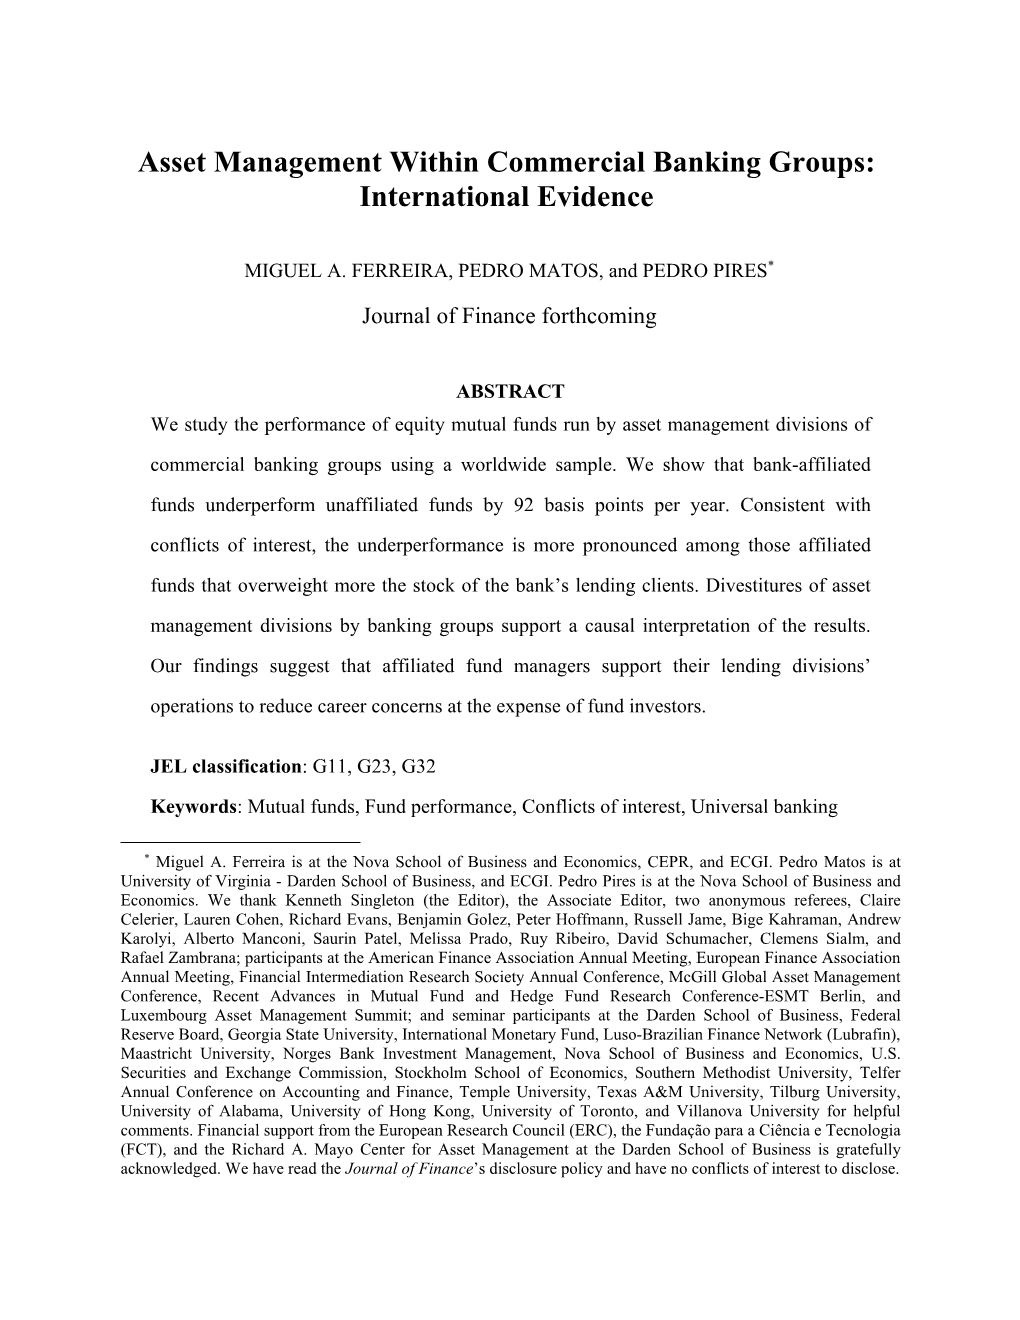 Asset Management Within Commercial Banking Groups: International Evidence